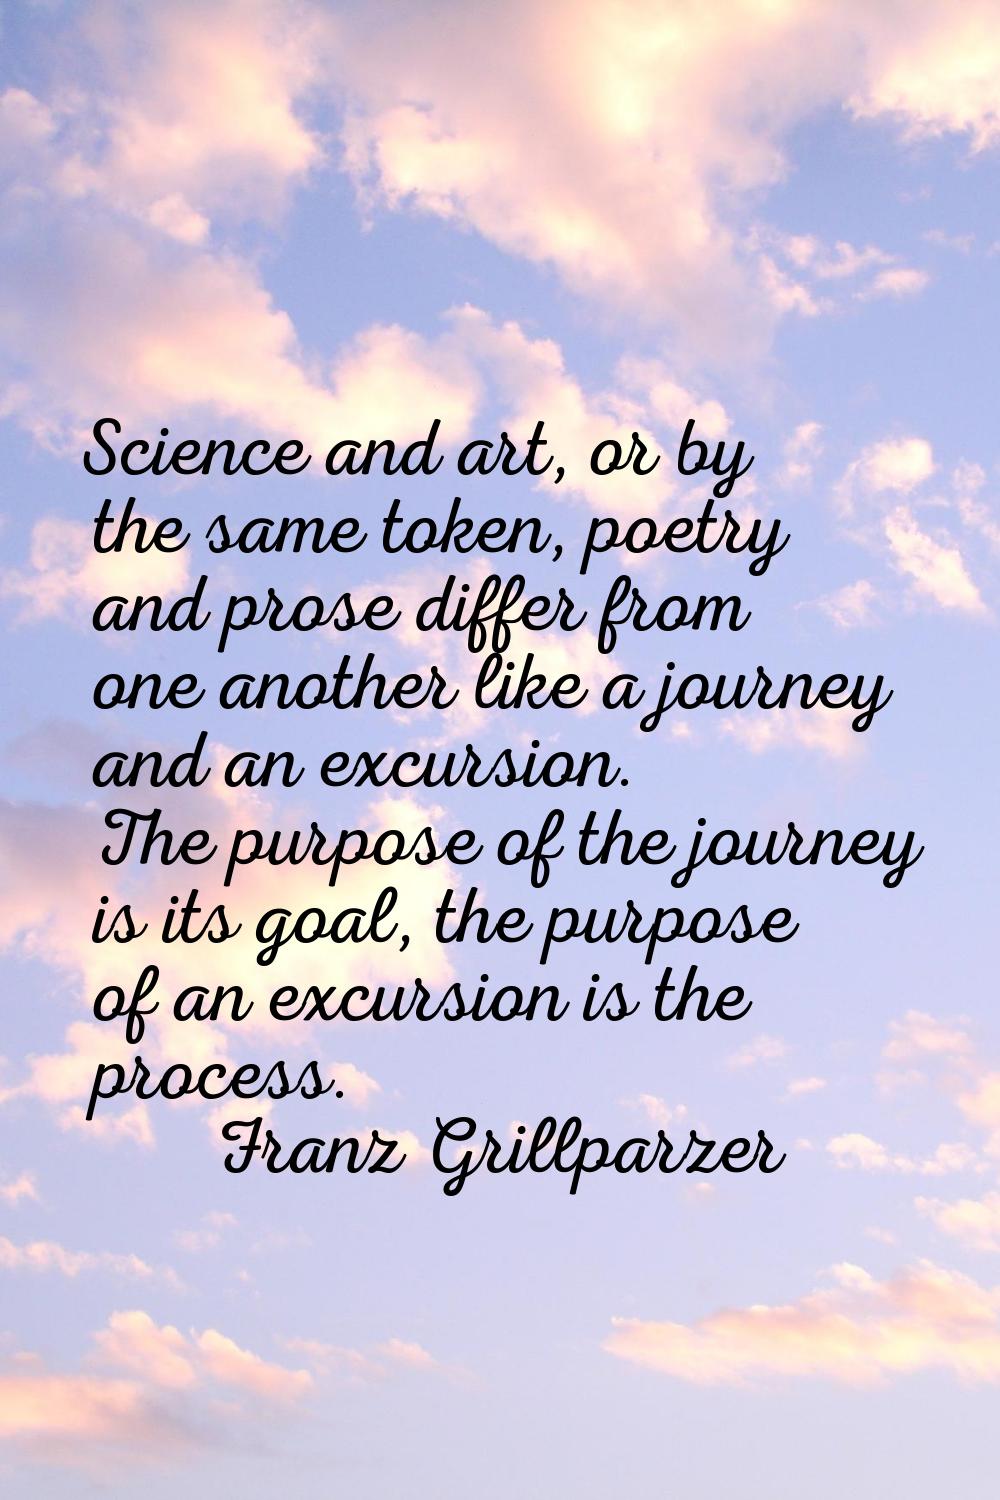 Science and art, or by the same token, poetry and prose differ from one another like a journey and 